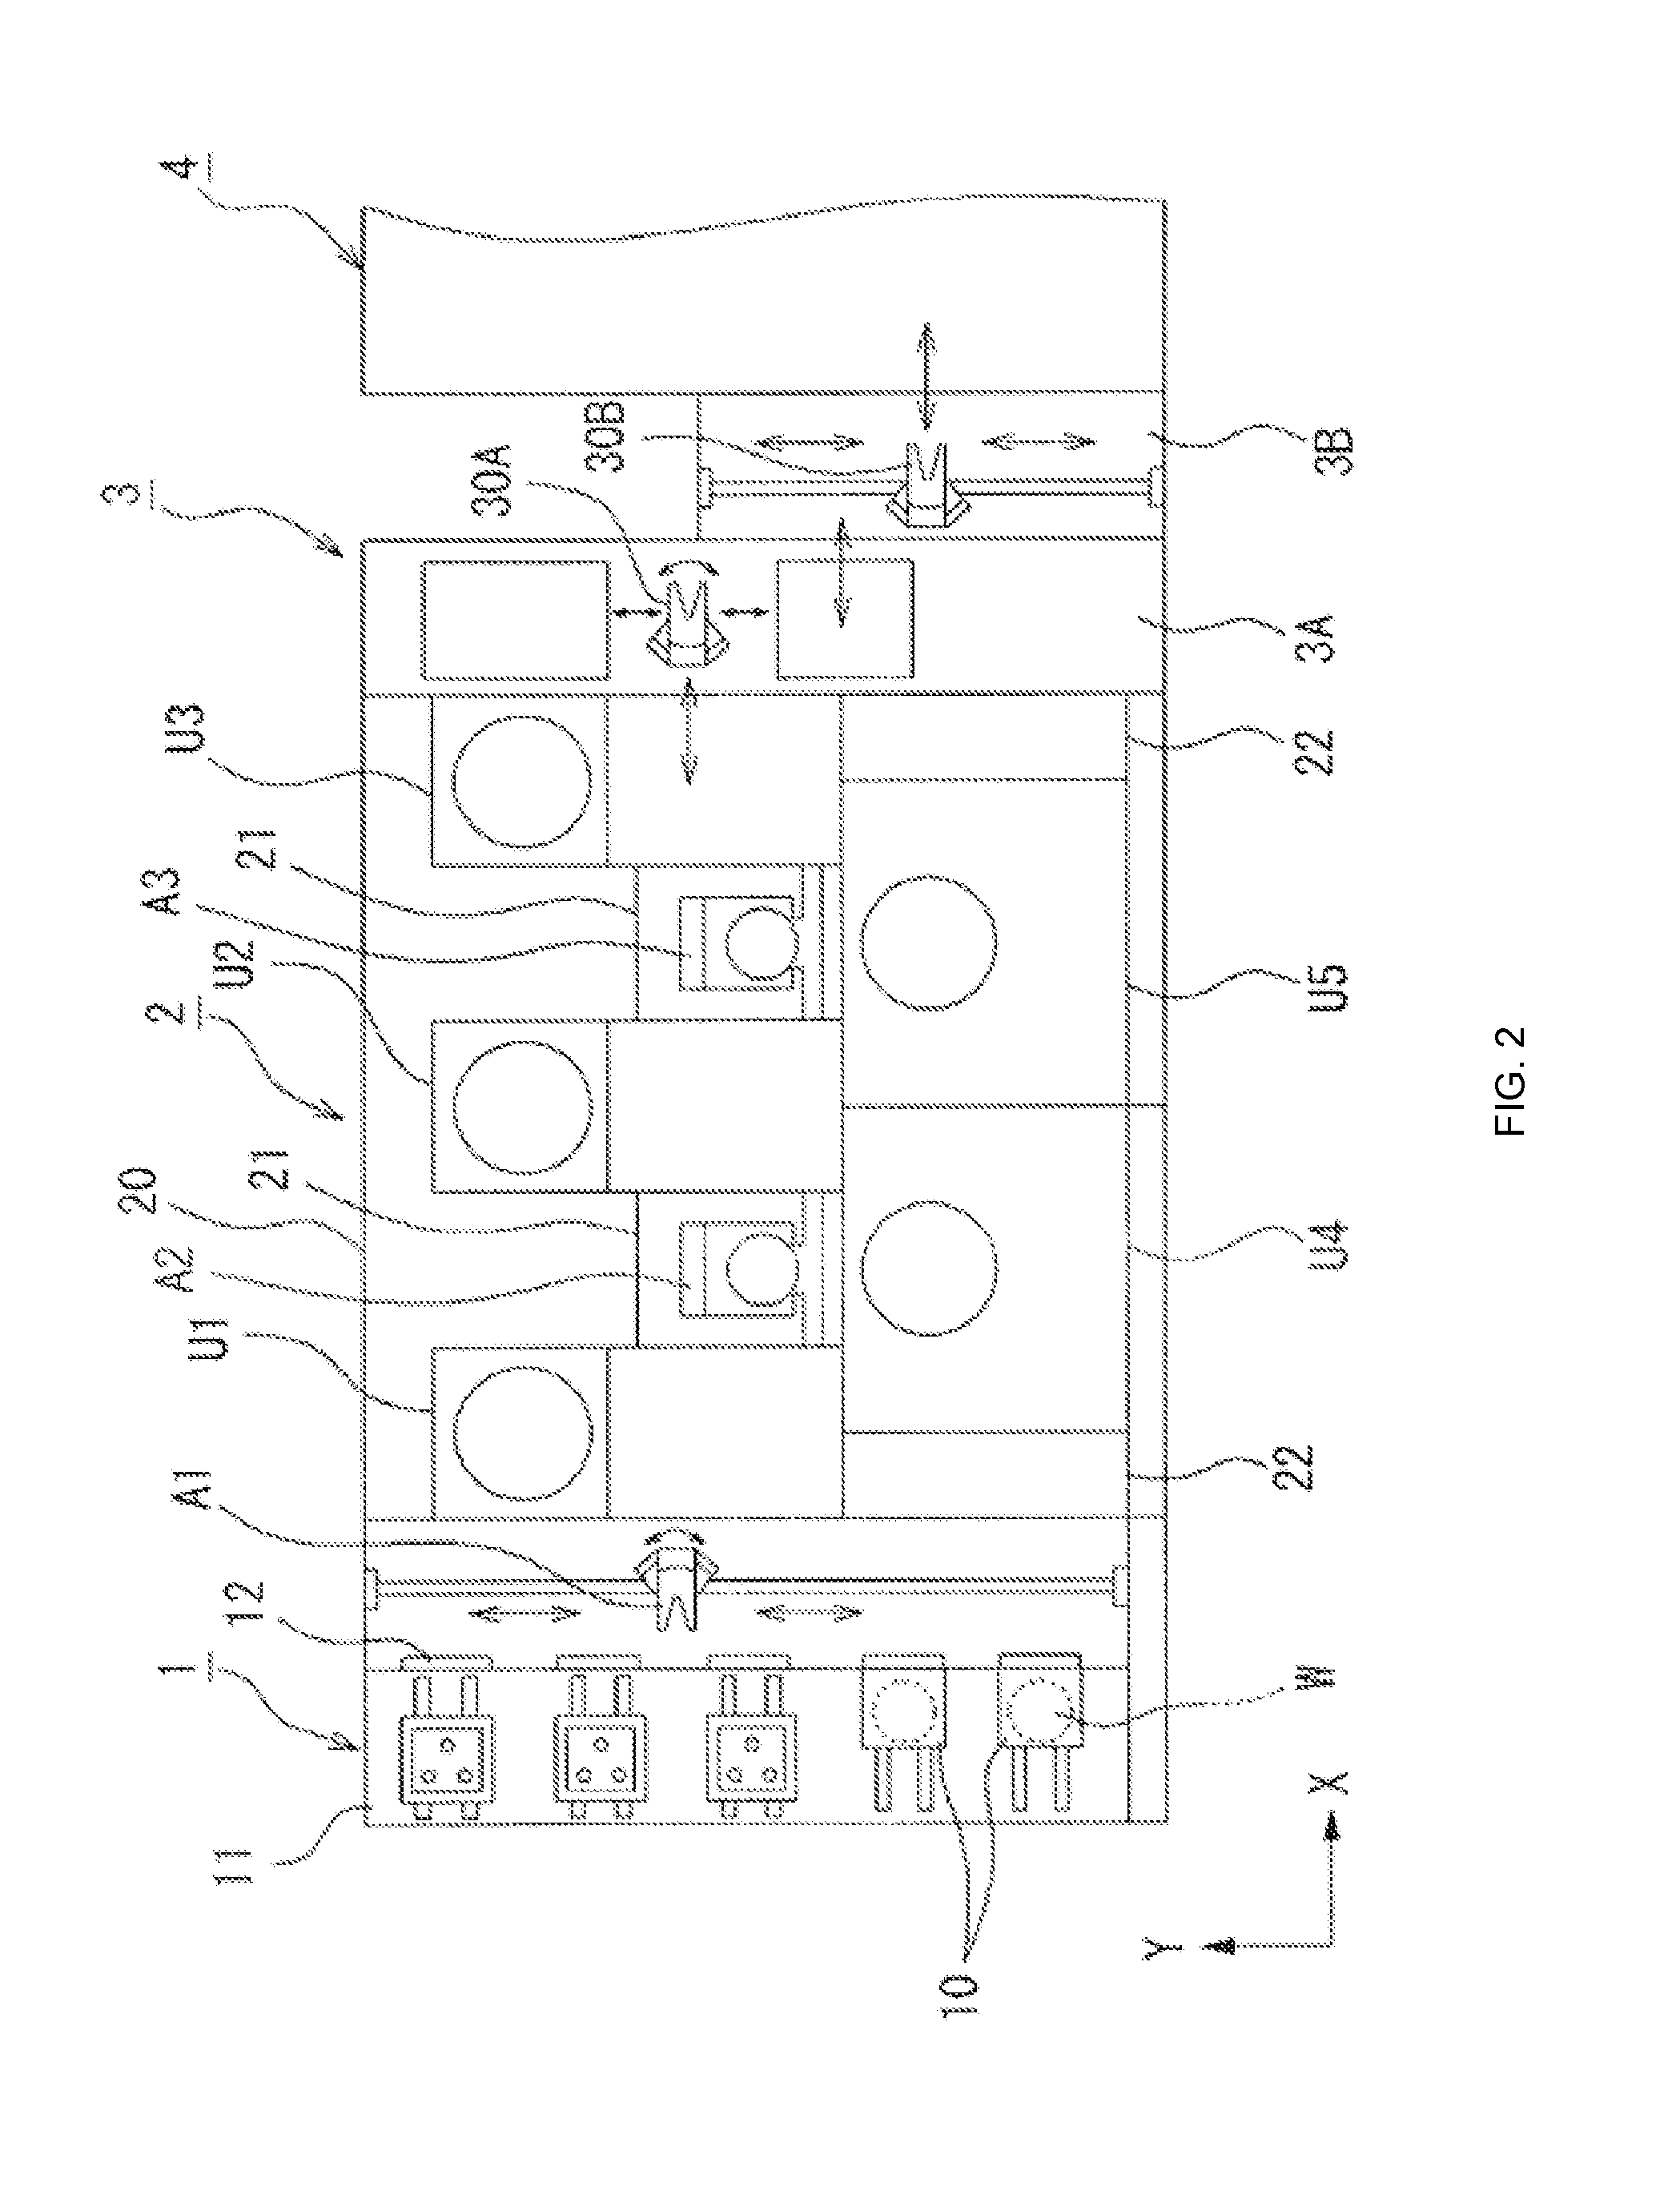 Method and apparatus for increased recirculation and filtration in a photoresist dispense system using a liquid empty reservoir